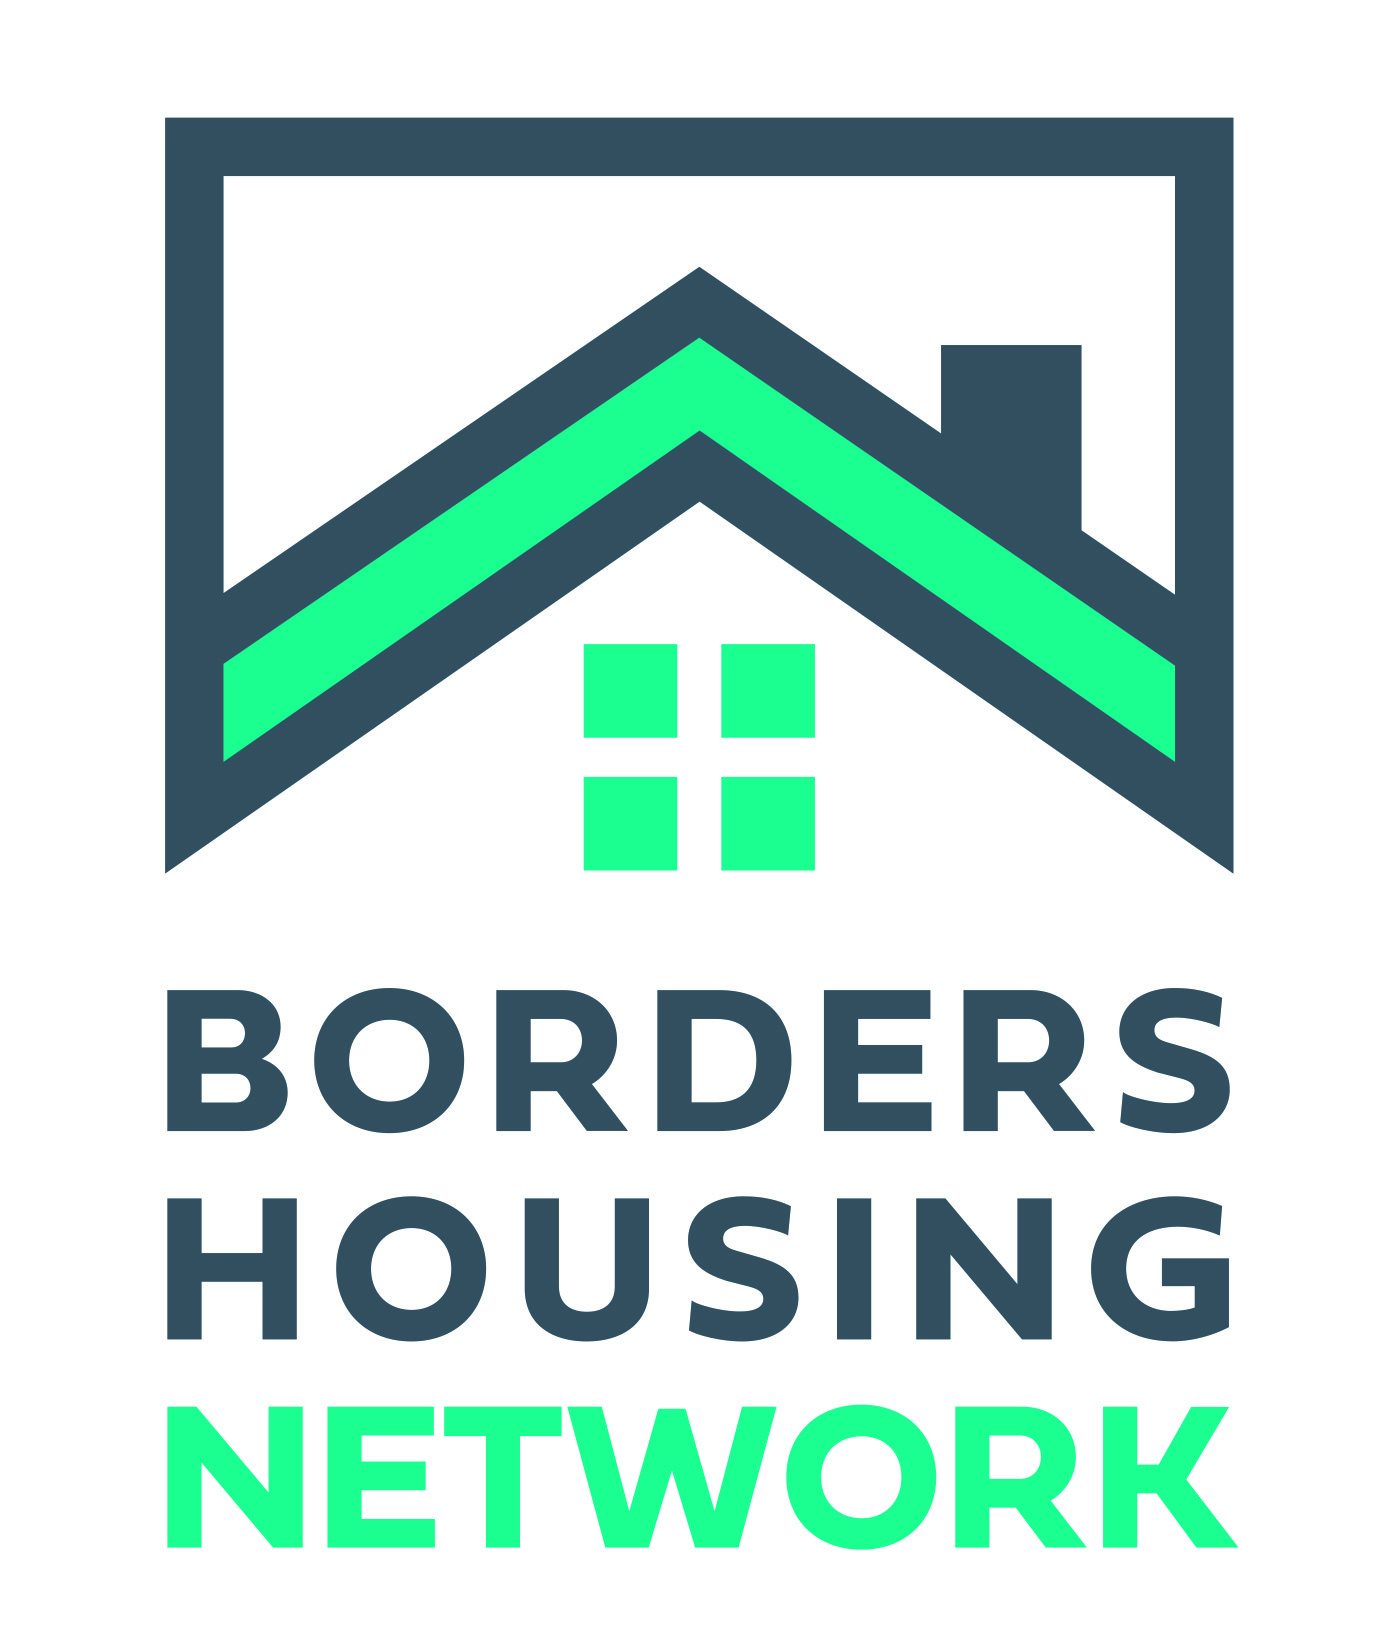 Borders Housing Network: Working in partnership to help combat fuel poverty